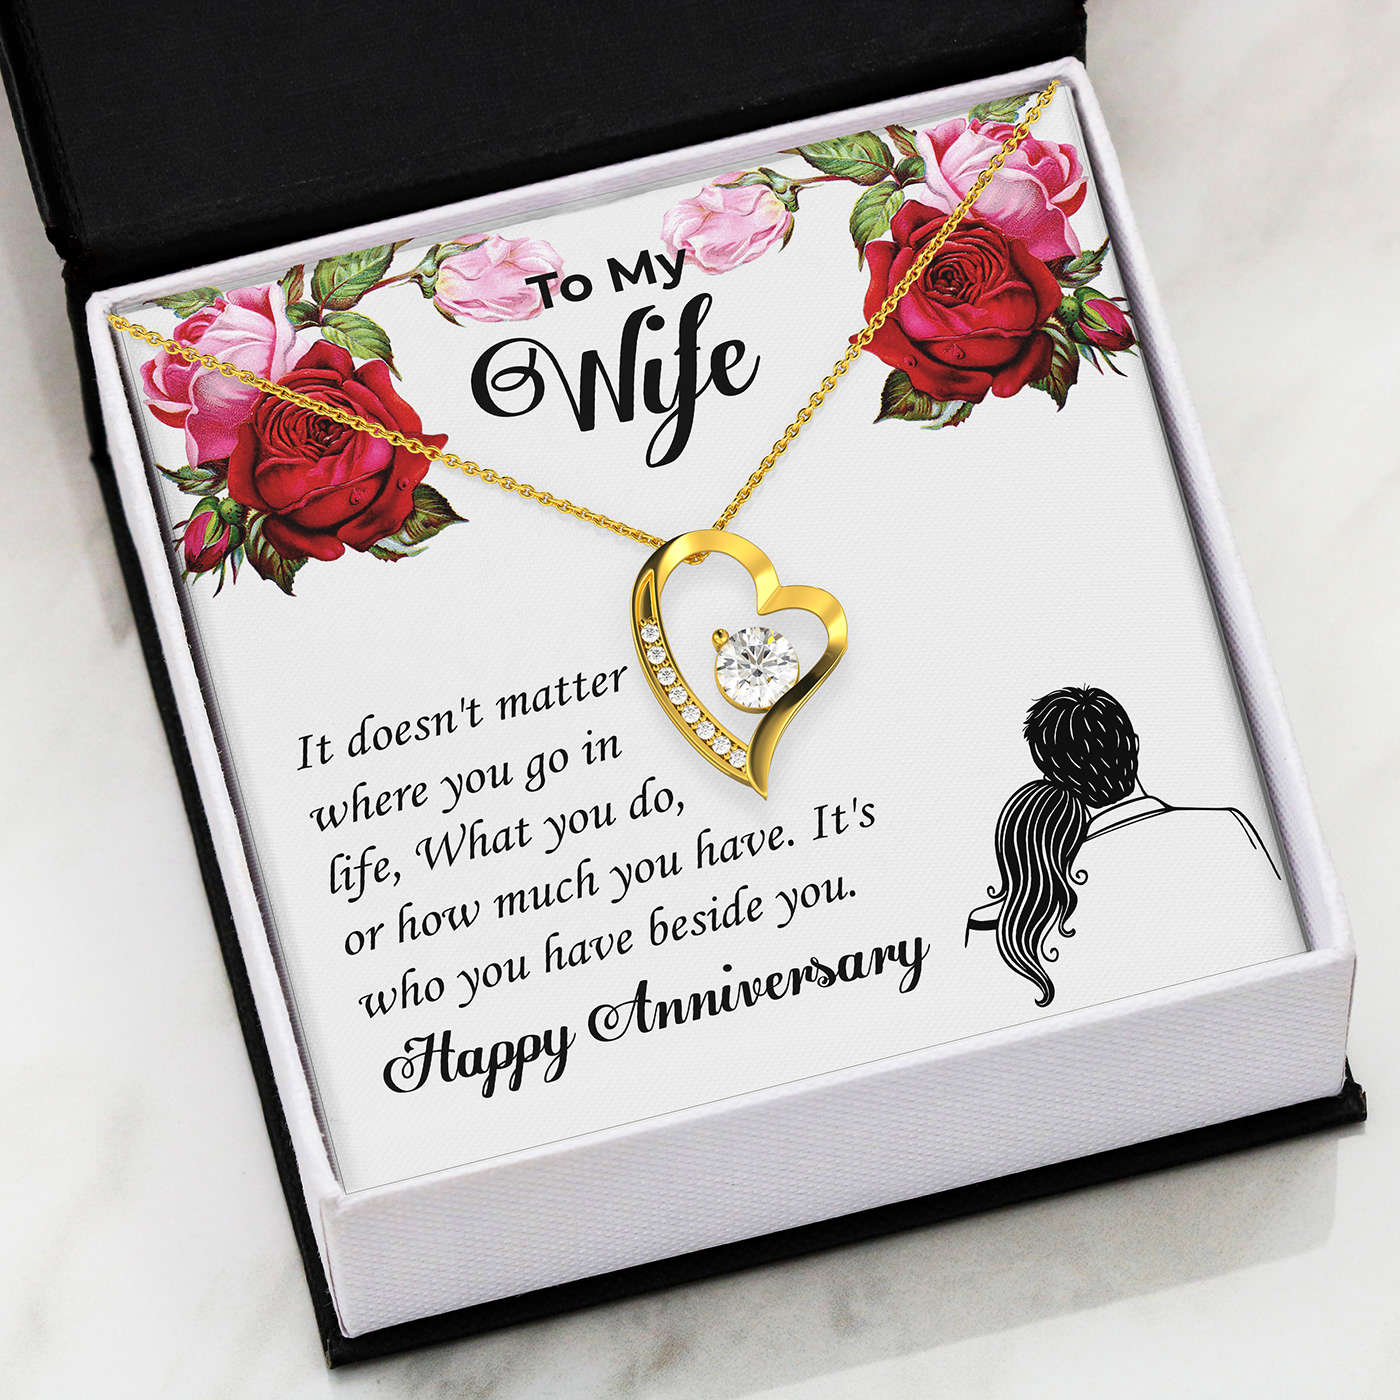 anniversary Birthday free mockup  gearbubble gift card husband to wife message card design Necklace pendant SHINEON  